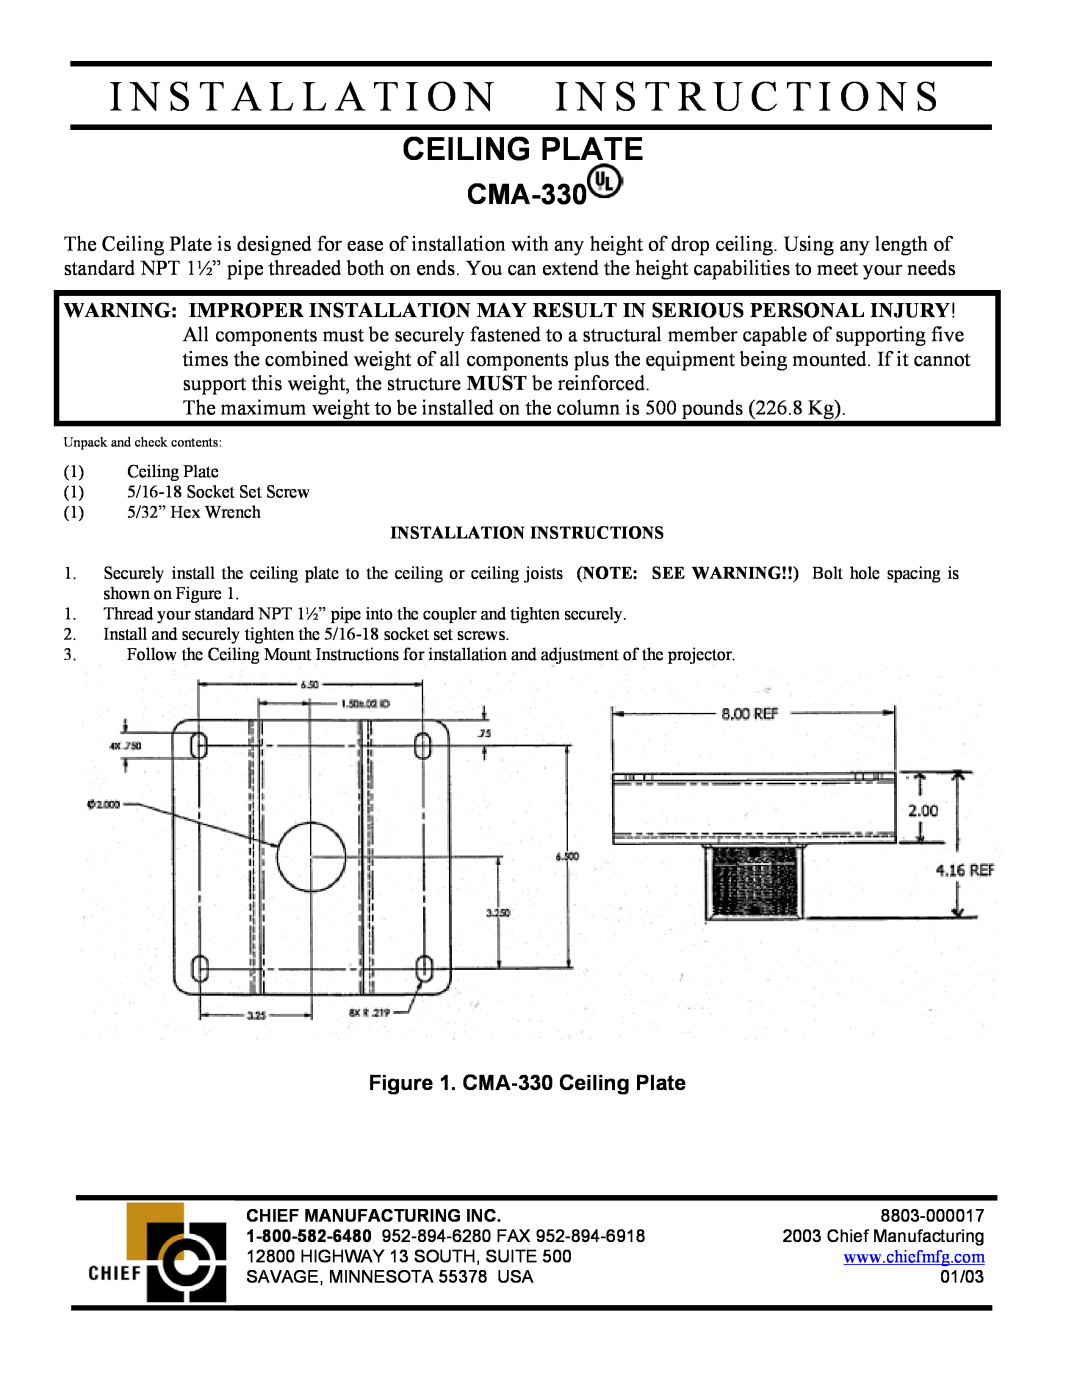 Chief Manufacturing CMA-330 installation instructions I N S T A L L A T I O N I N S T R U C T I O N S, Ceiling Plate 